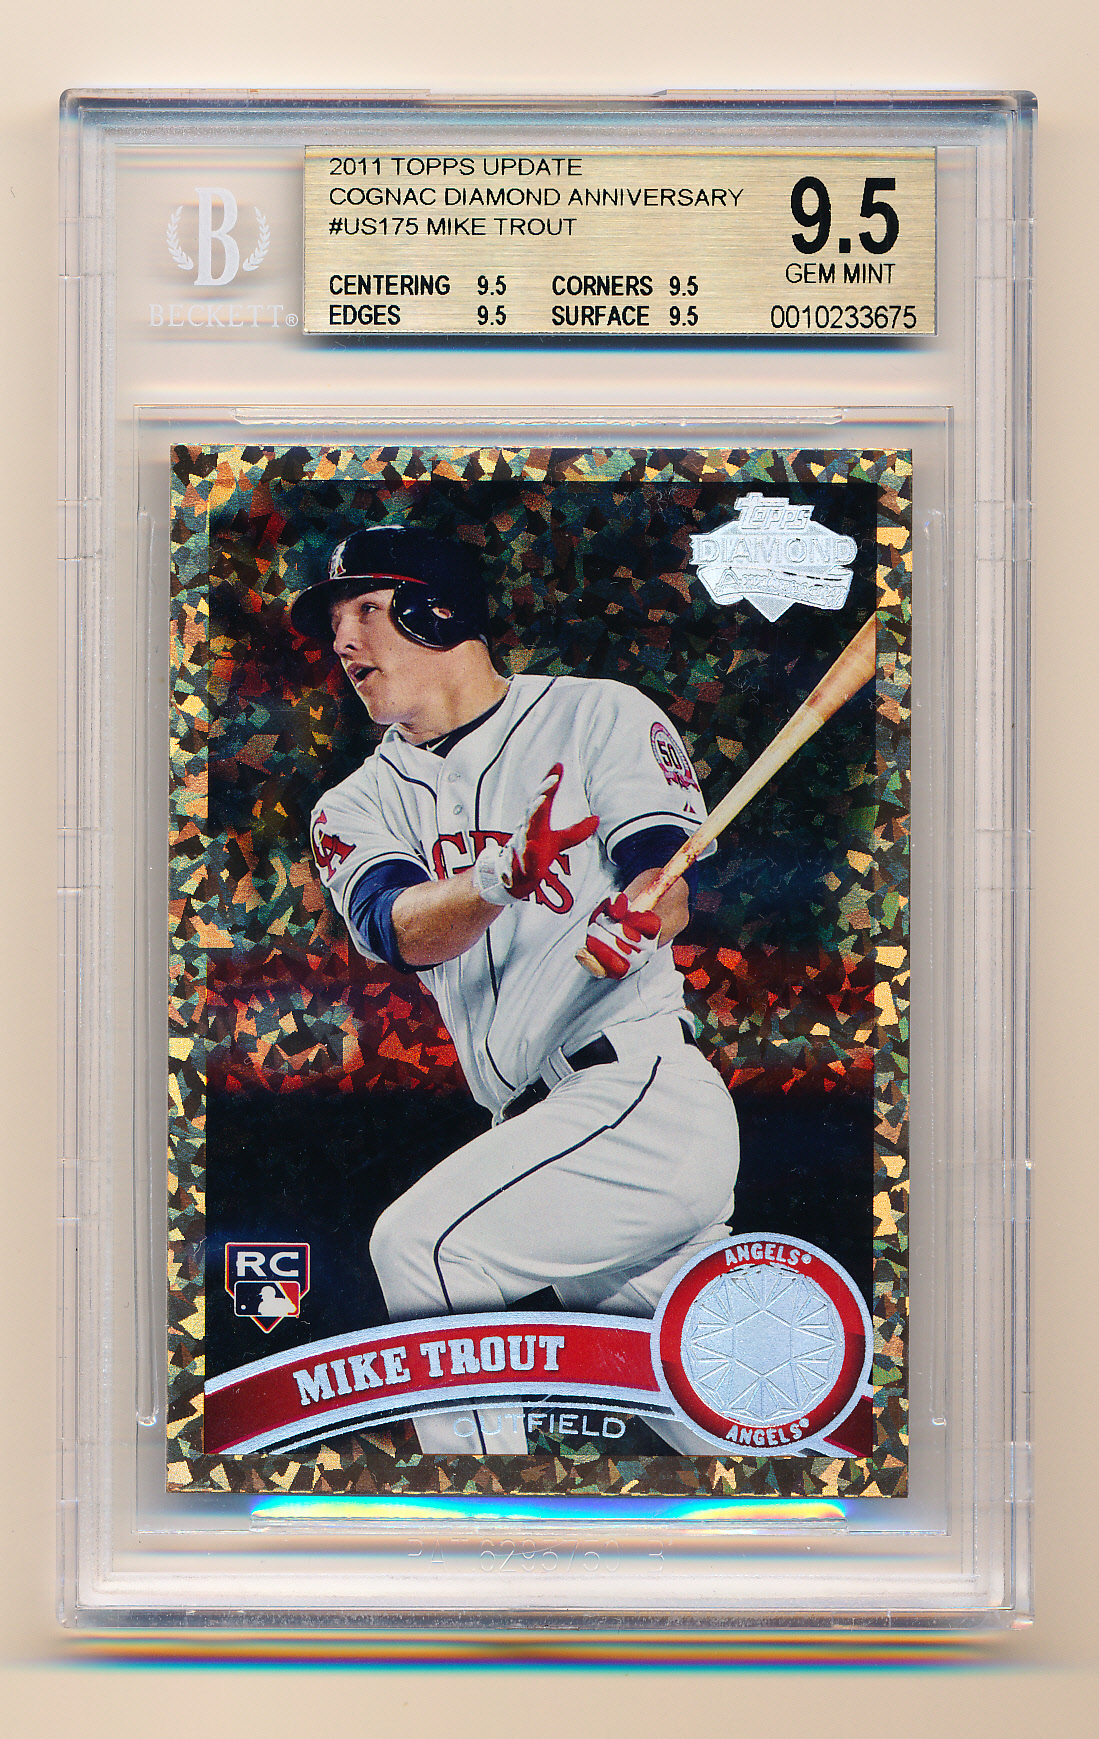 2011 Topps Update Cognac Diamond Anniversary #US175 Mike Trout BGS